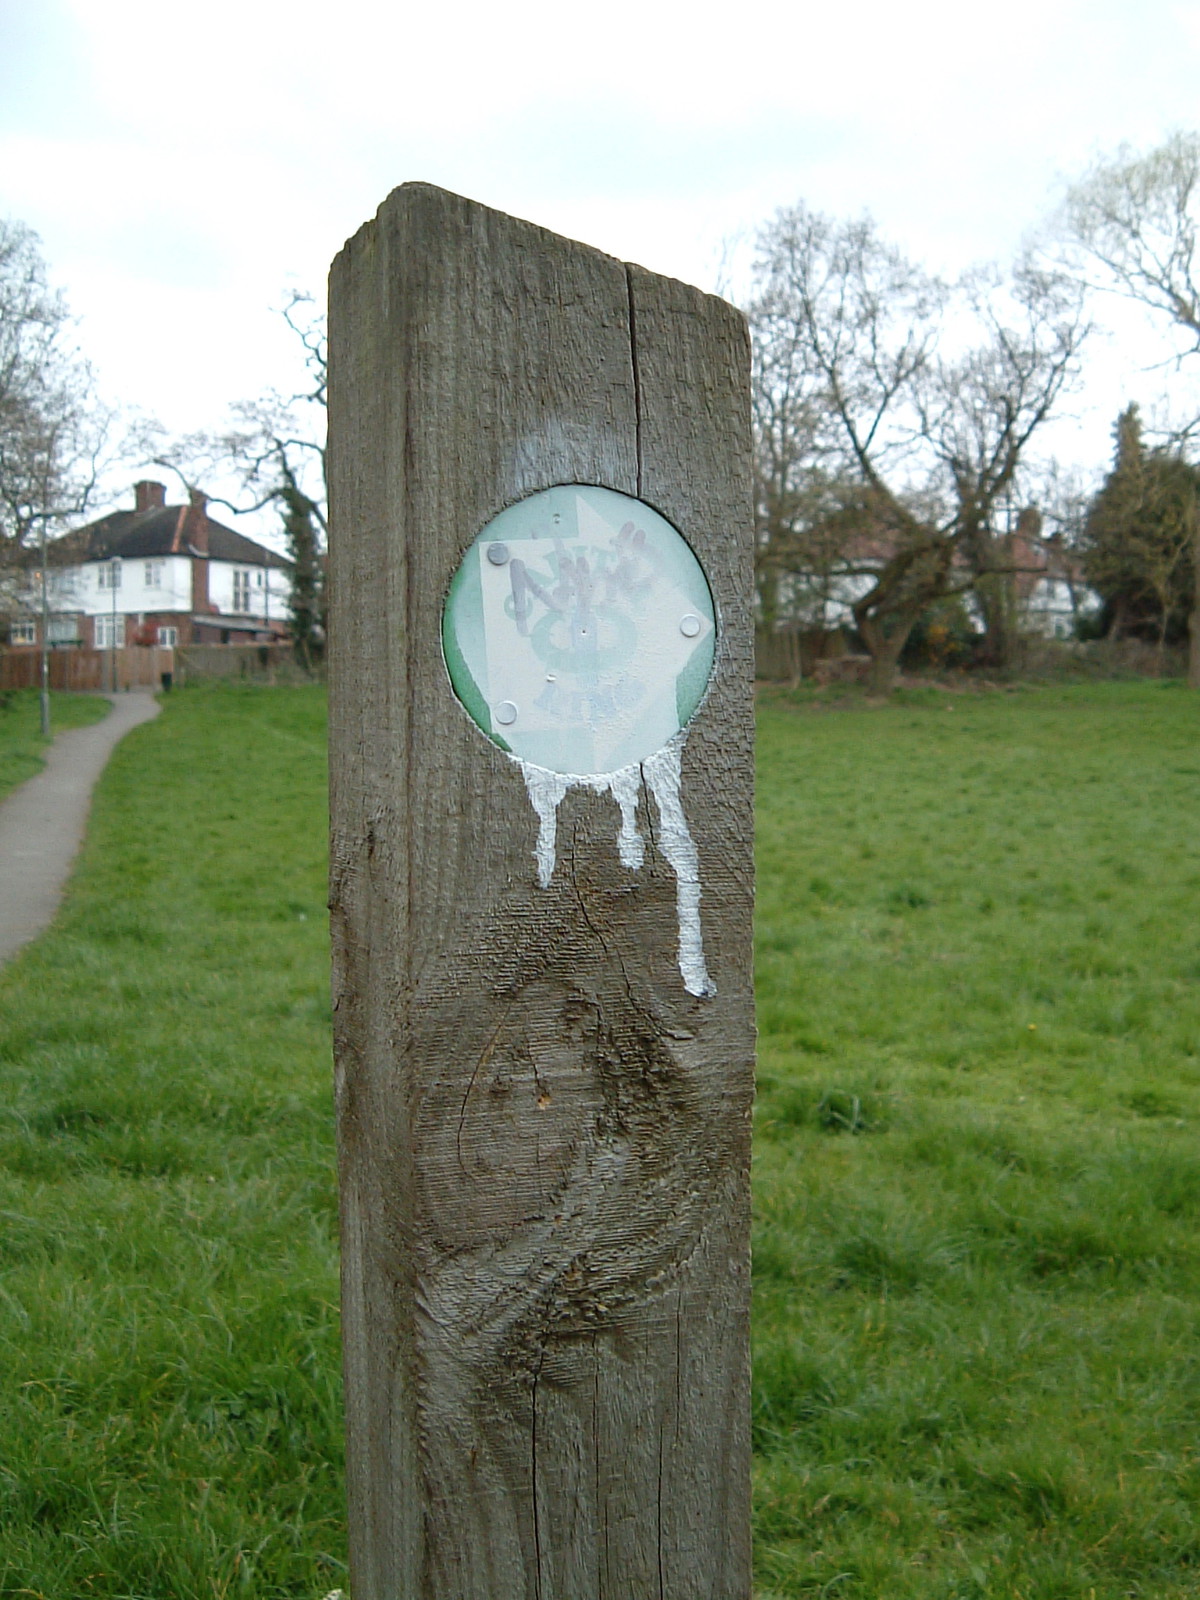 A vandalised Capital Ring signpost where Dollis Brook and Mutton Brook merge to form the River Brent